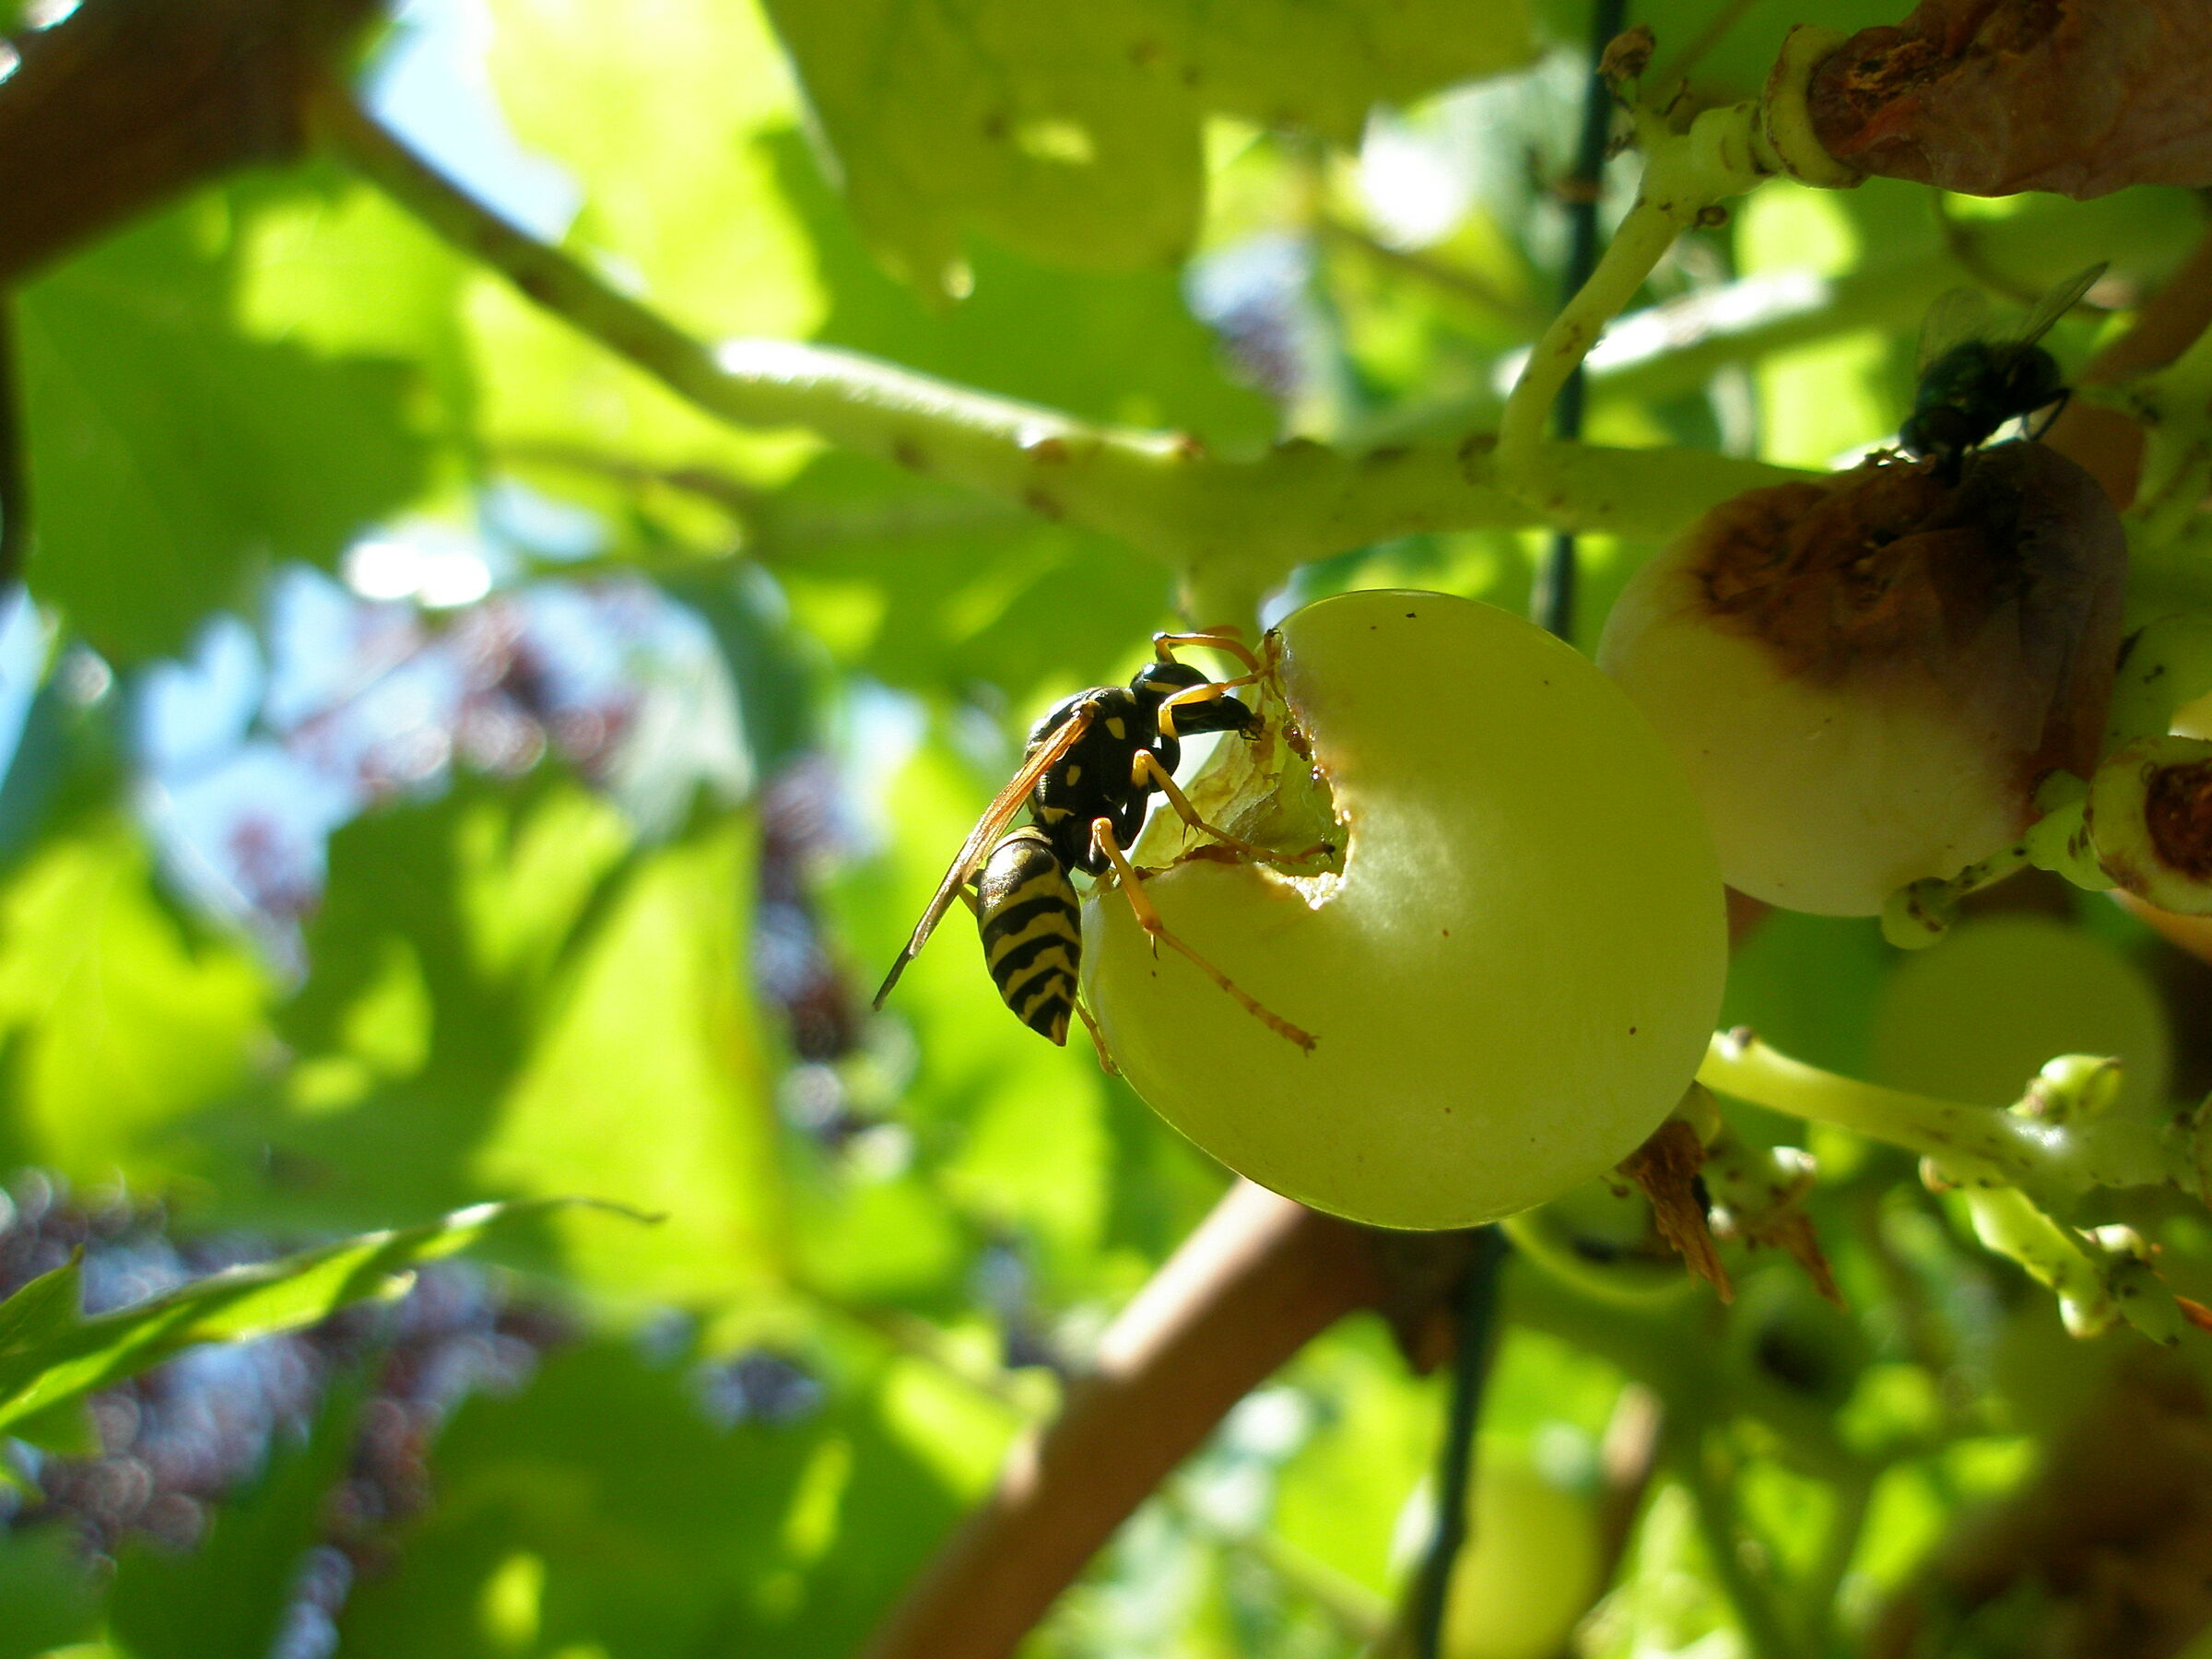 The Wasp and the Grapes...